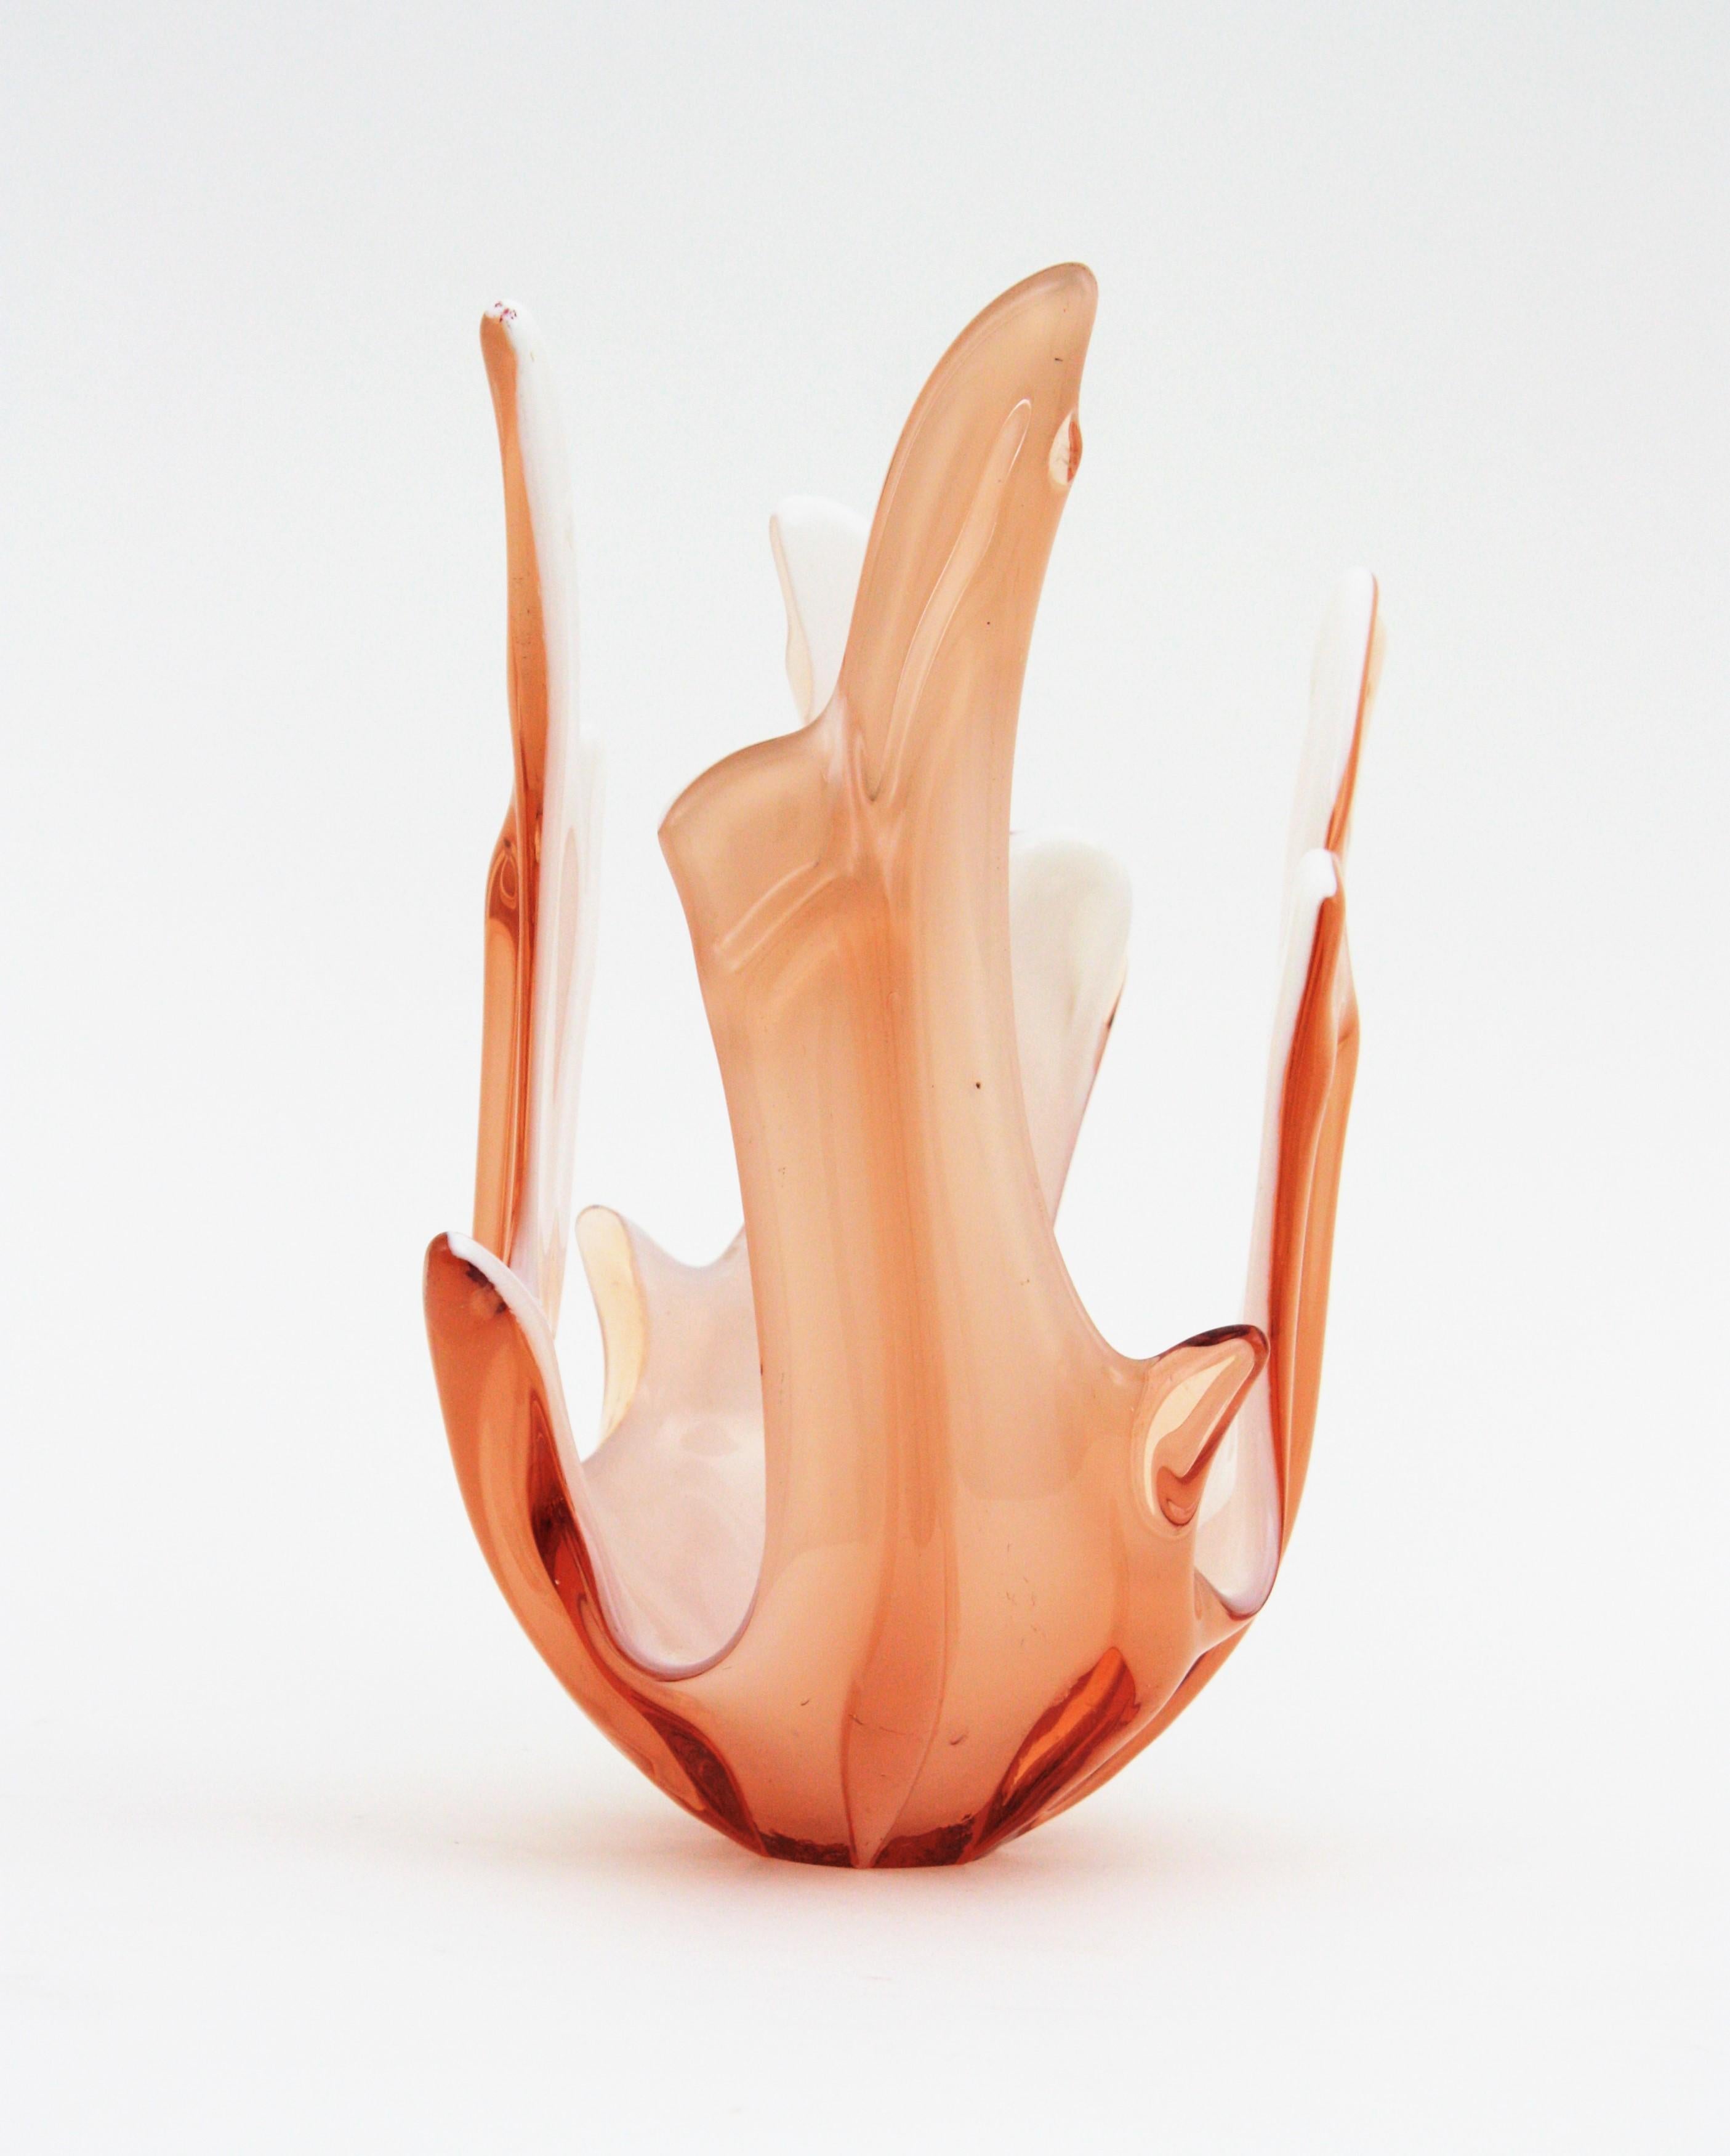 Sculptural Murano glass freeform centerpiece in peach pink color. 
The interior part is made in white opaline glass. The exterior part is made in baby pink / soft peach color.
Amazing organic design and eye-catching color.
Place it alone or as a